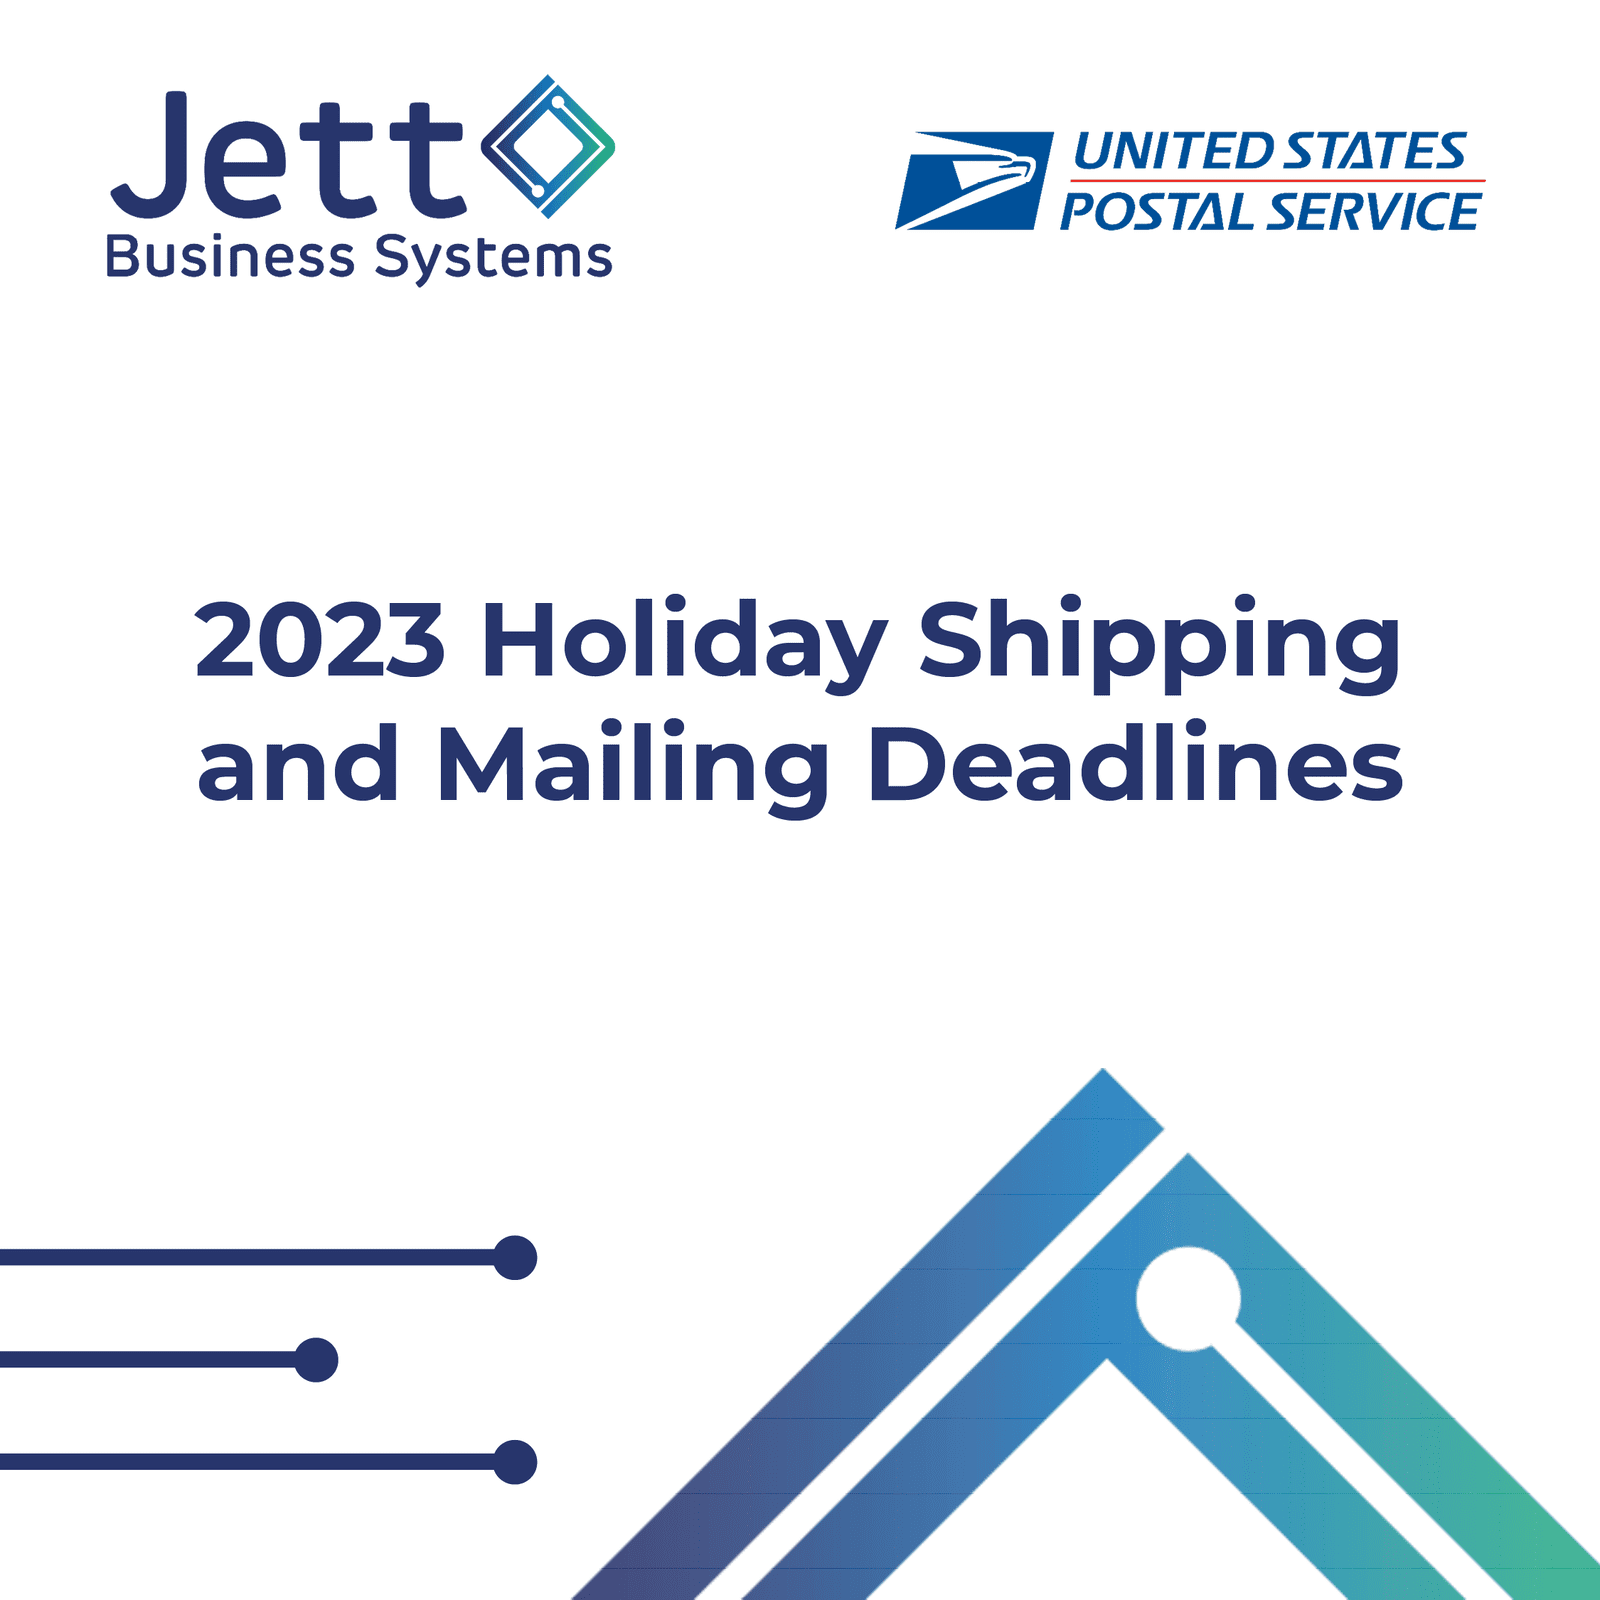 USPS Holiday Shipping and Mailing Deadlines